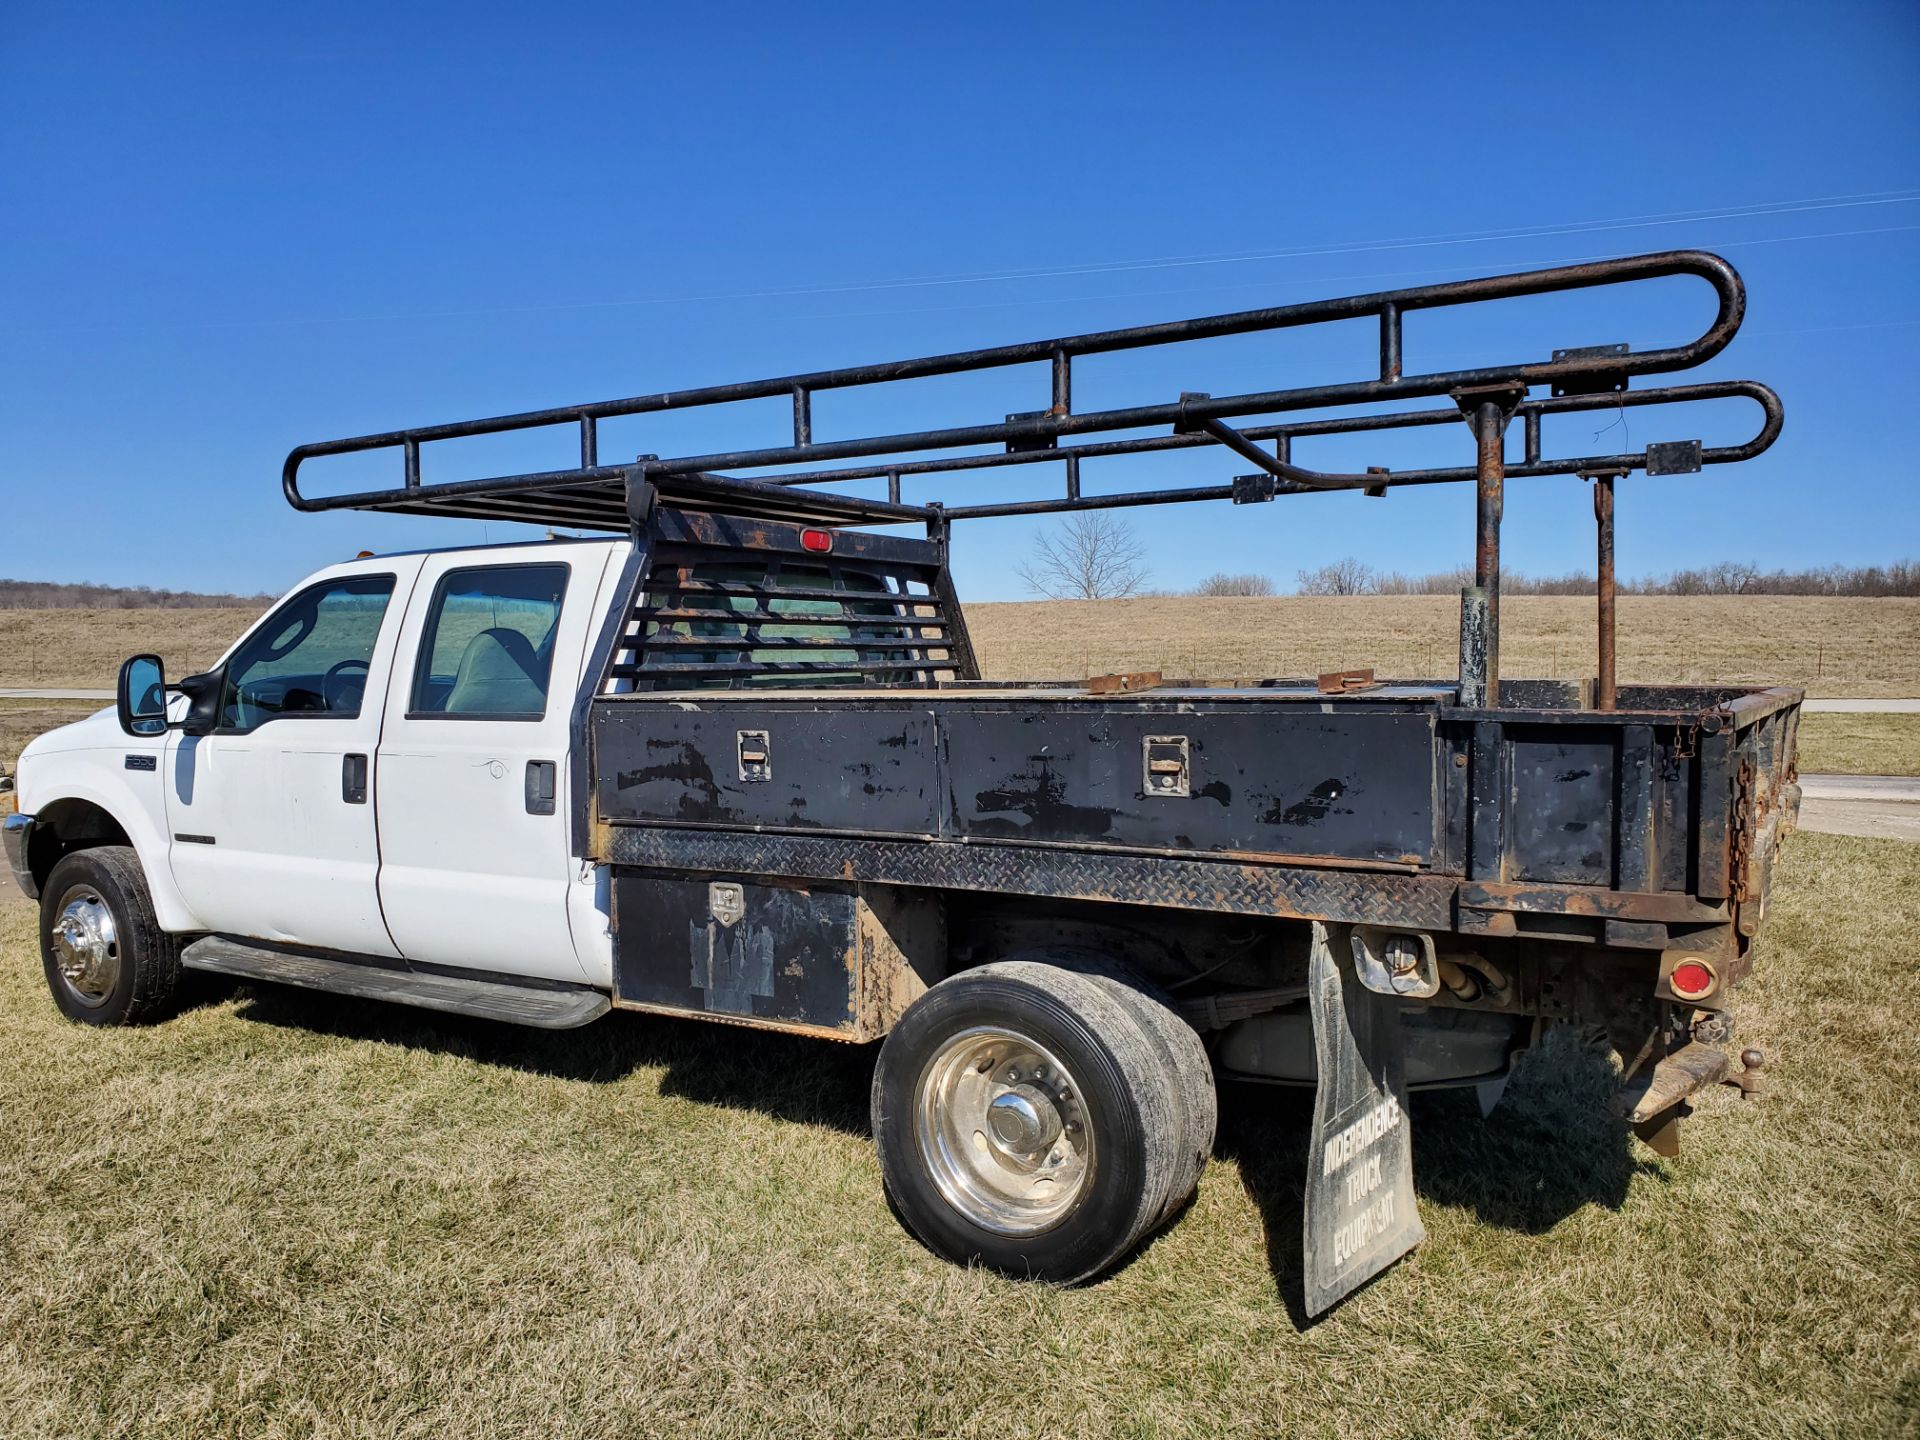 2003 F550 Ford Super Duty Pickup, Automatic, 7.3 Power Stroke Diesel, 8' Foot Omaha Flatbed - Image 9 of 18